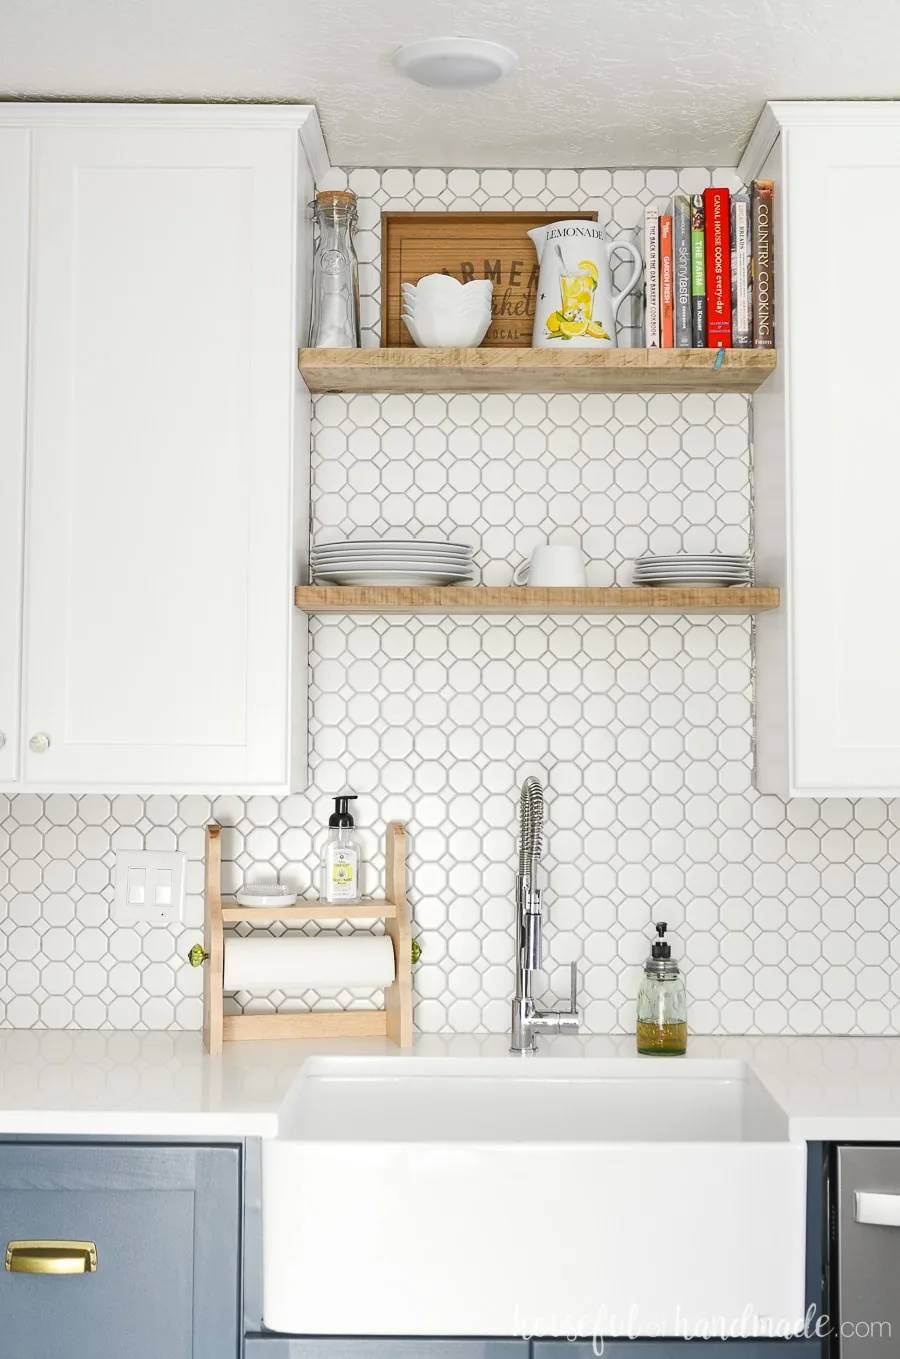 Large farmhouse sink in a kitchen with open shelving above the sink and white octagon tile backsplash. 